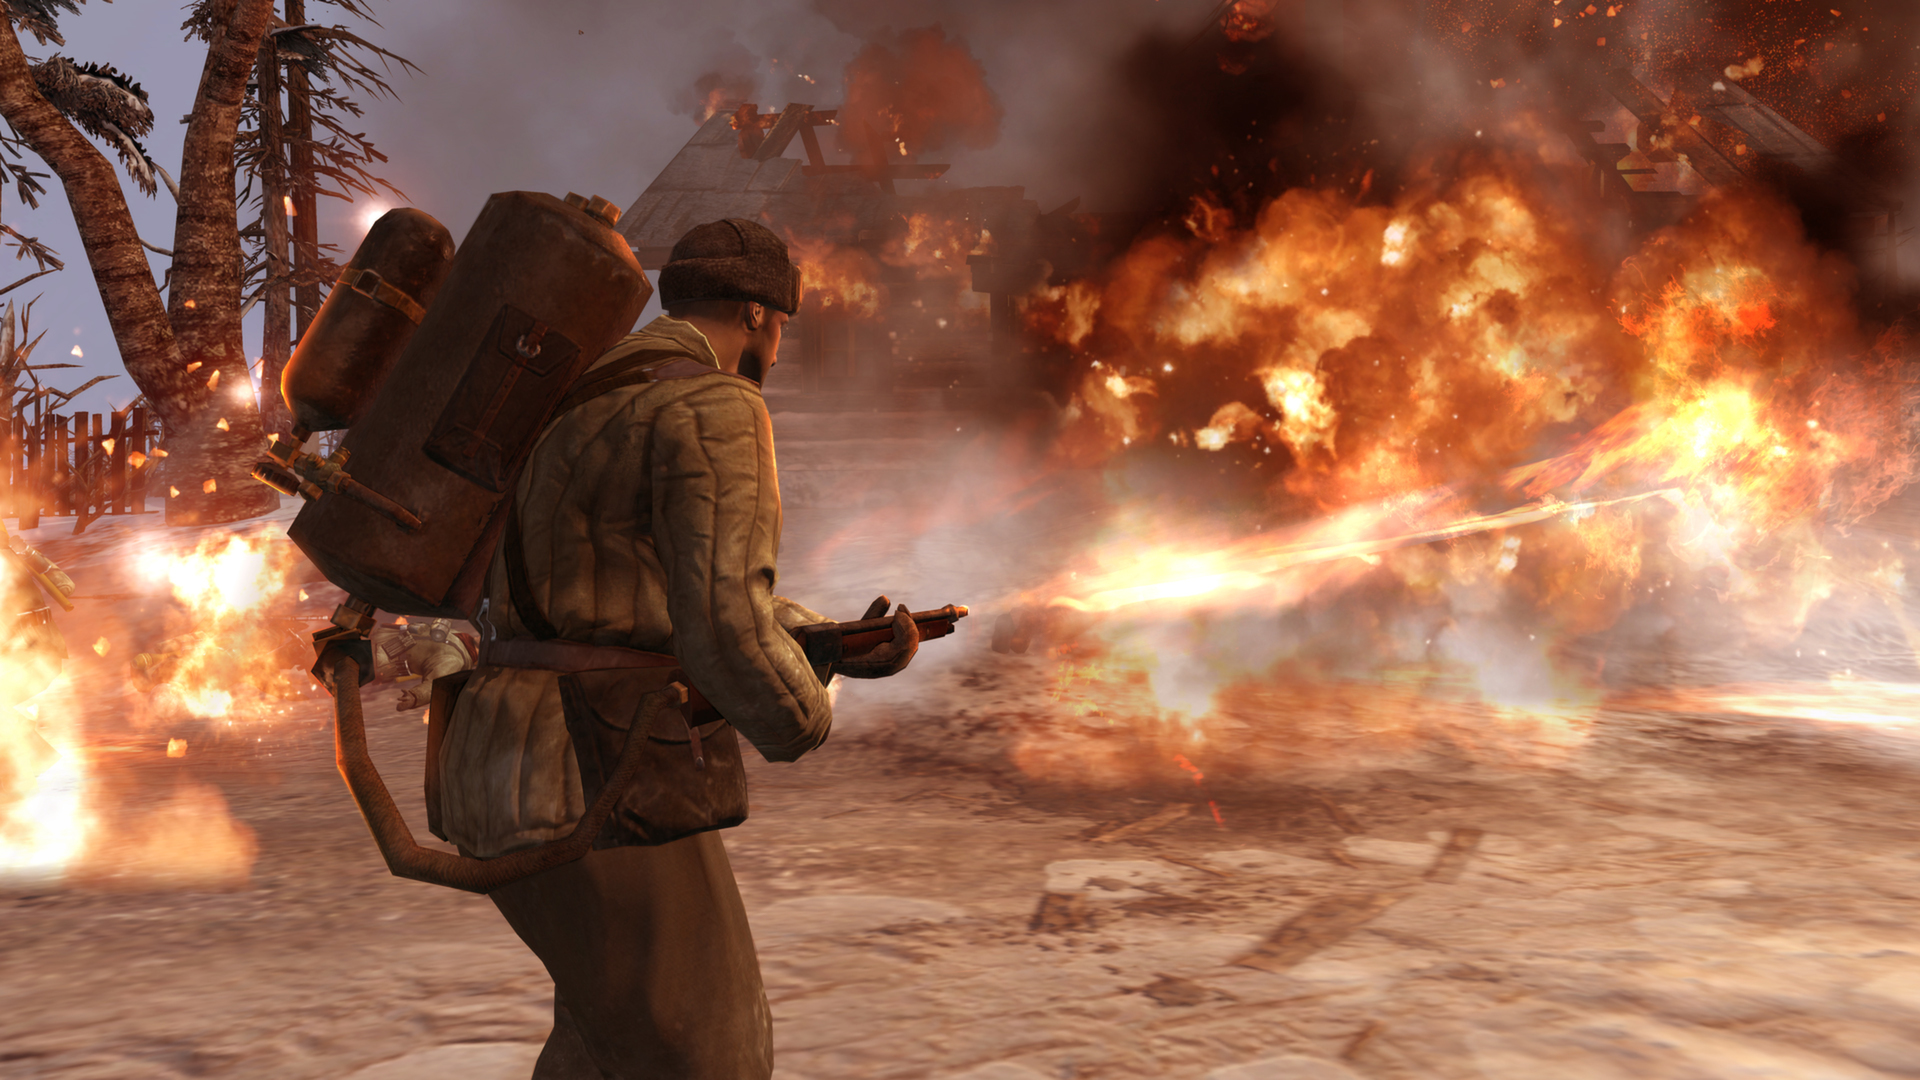 company of heroes 2 gameplay download free